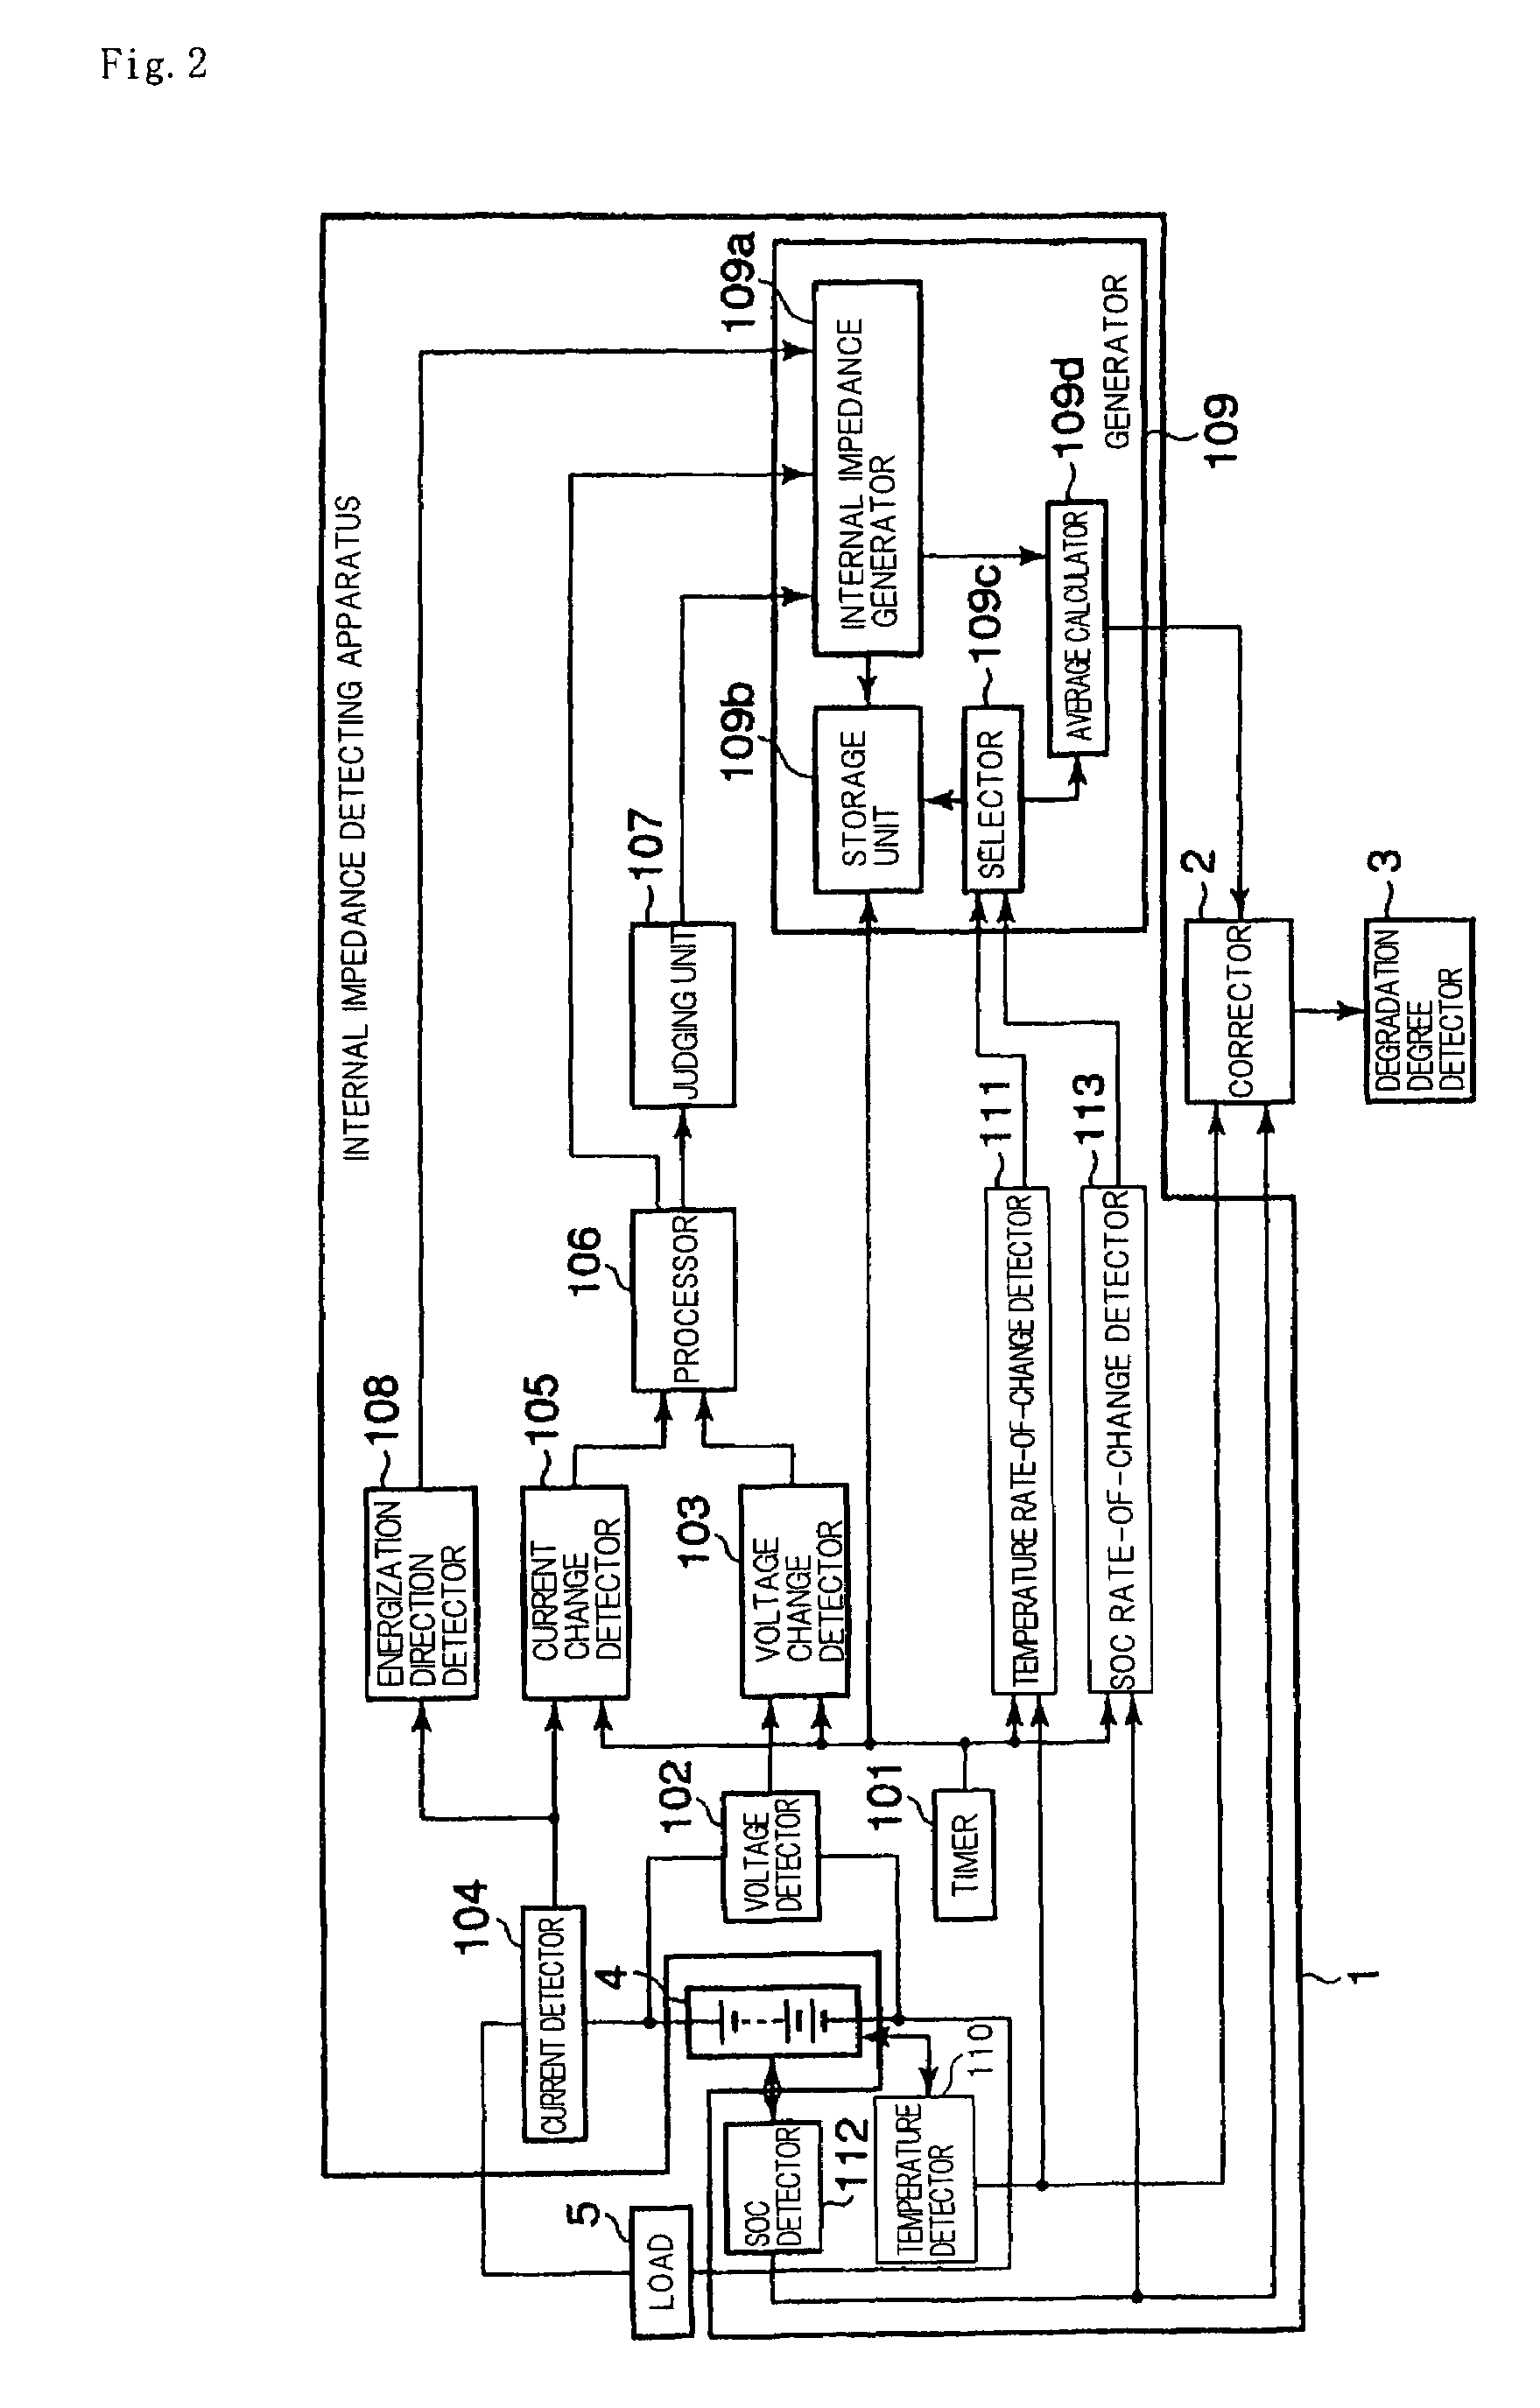 Apparatus and method for detecting internal impedance of a battery and a degree of battery degradation based on detected internal impedance